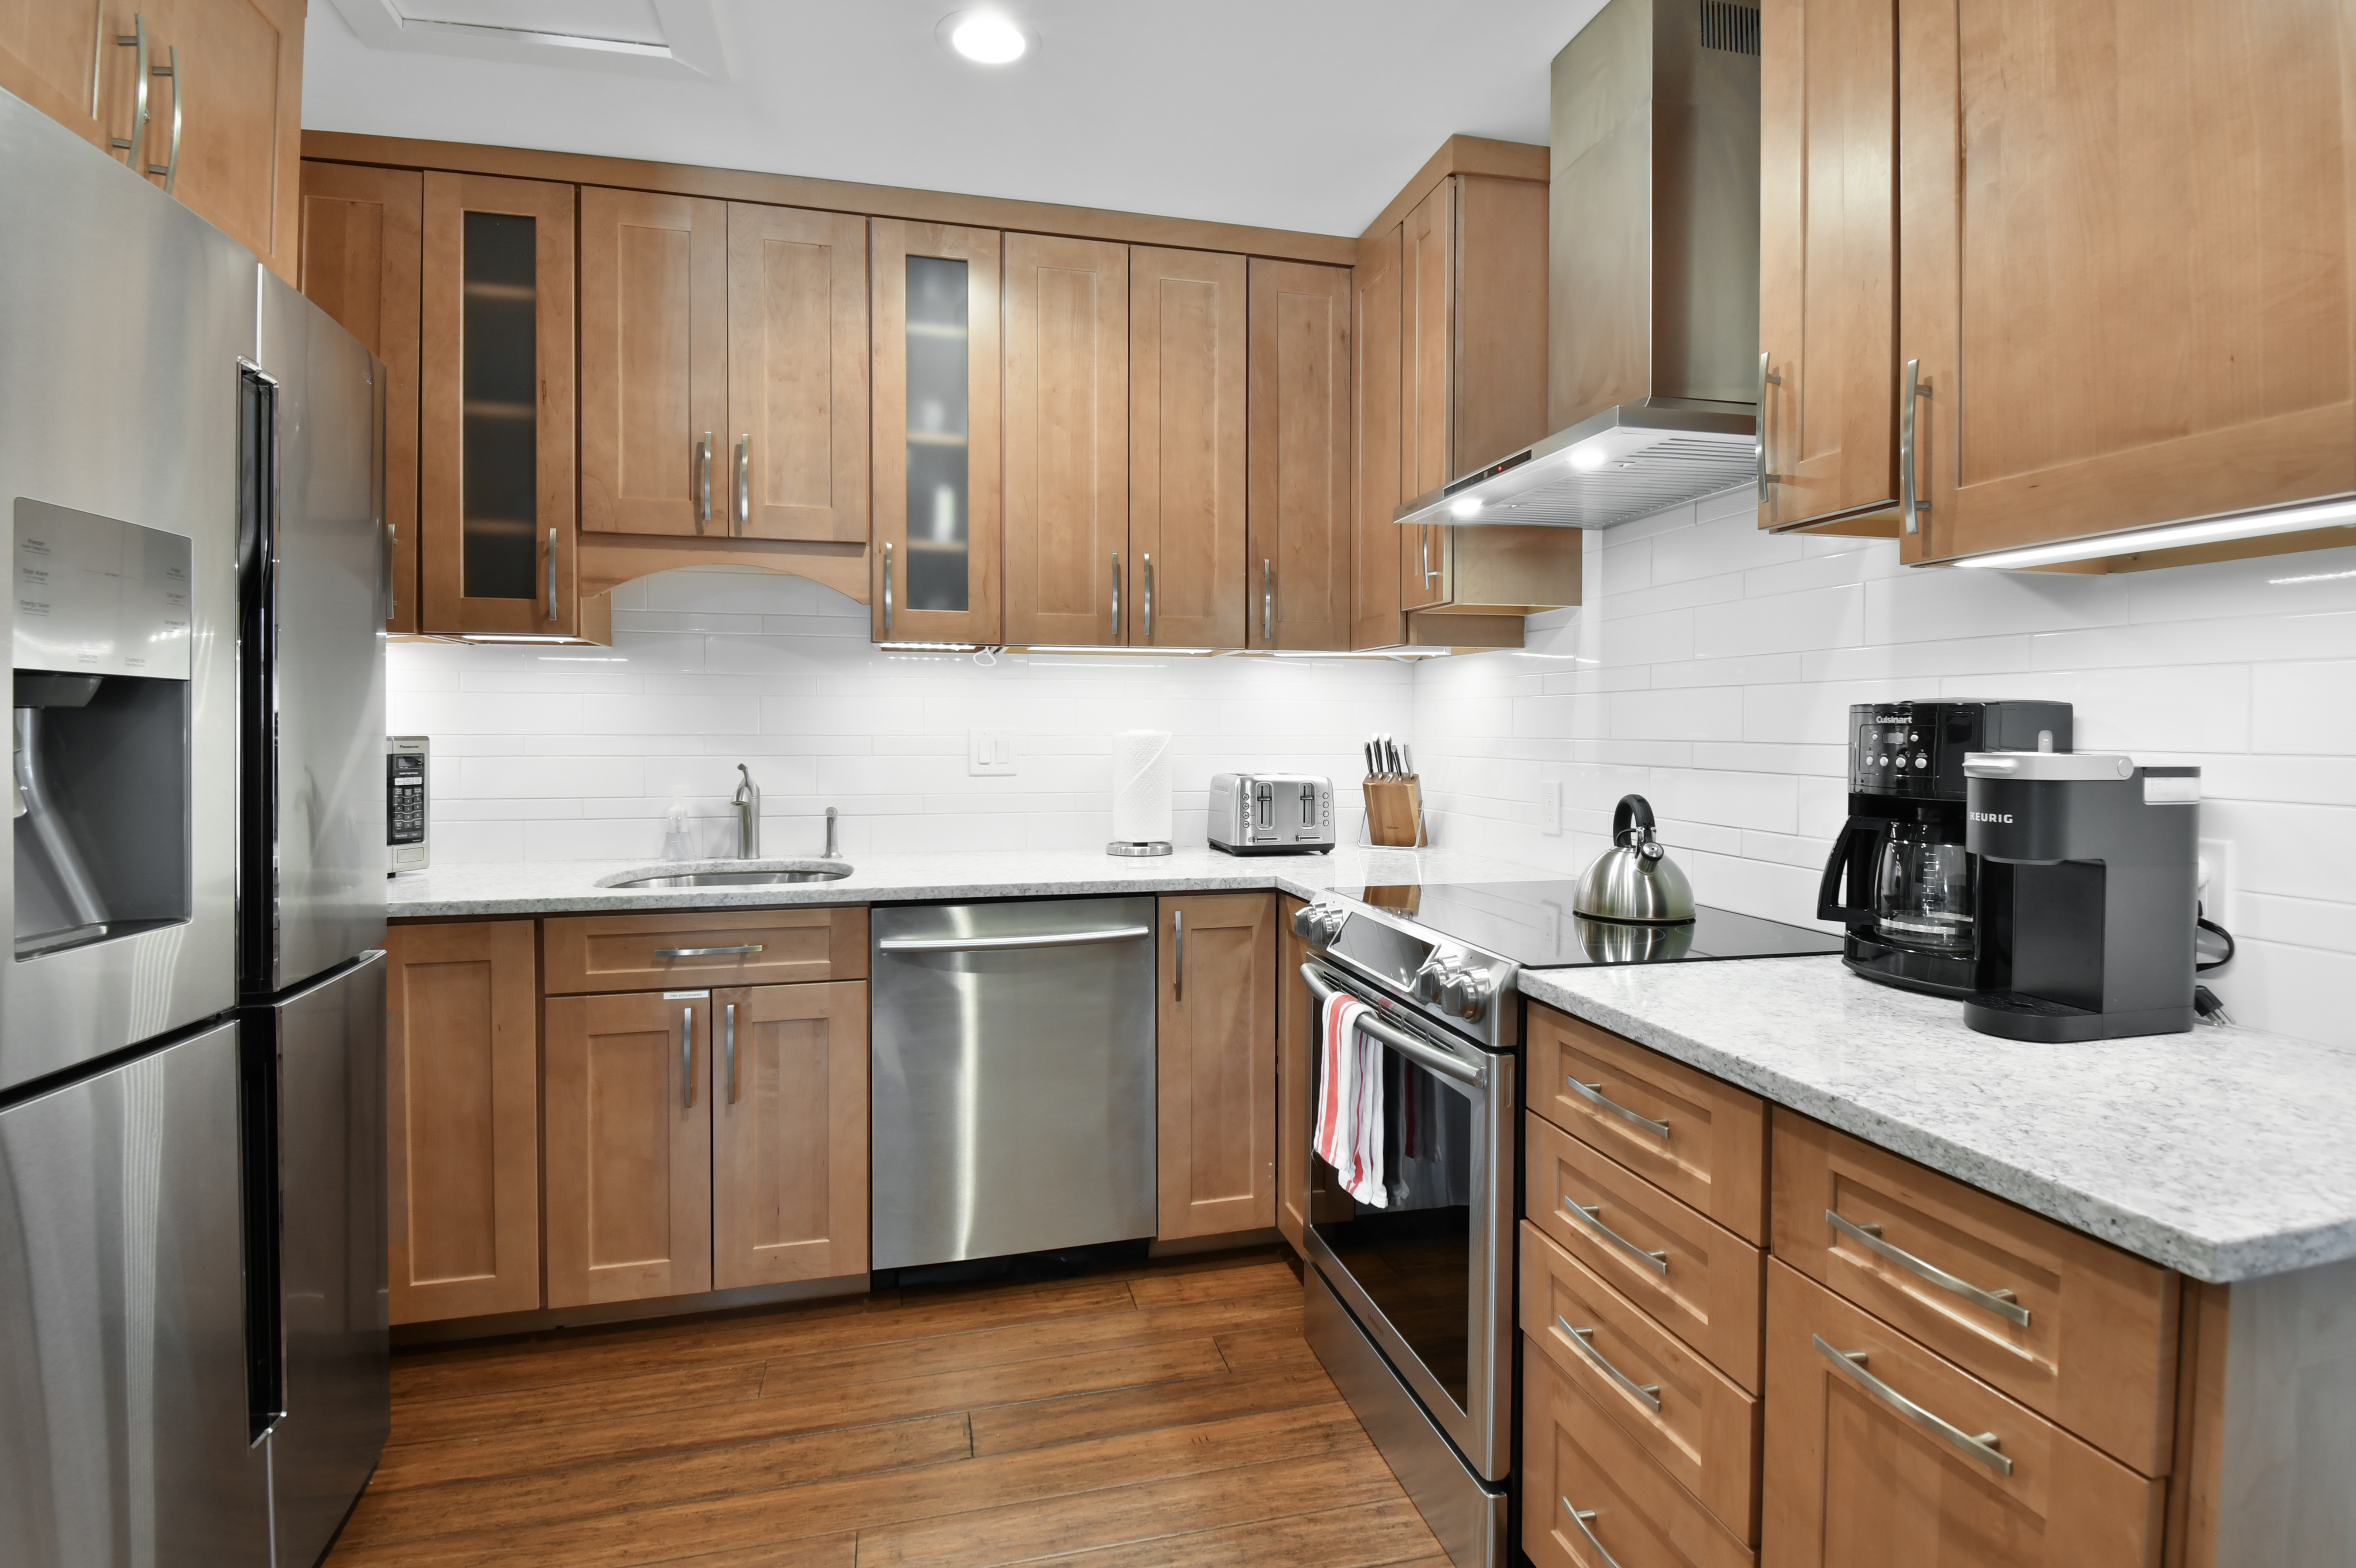 Luxurious kitchen with granite countertops and stainless steel appliances.